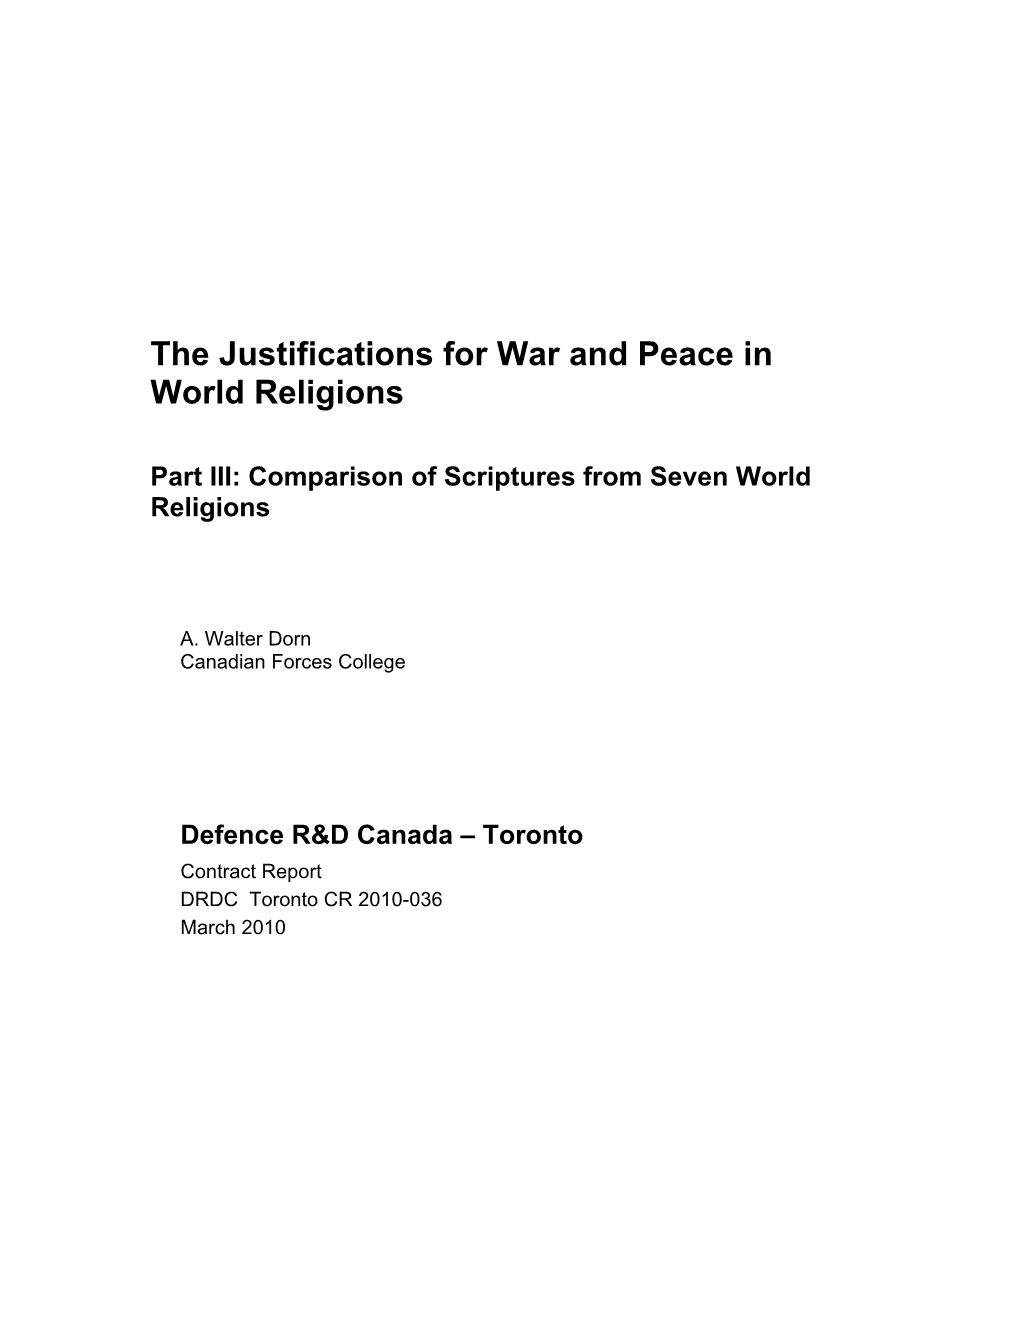 The Justifications for War and Peace in World Religions